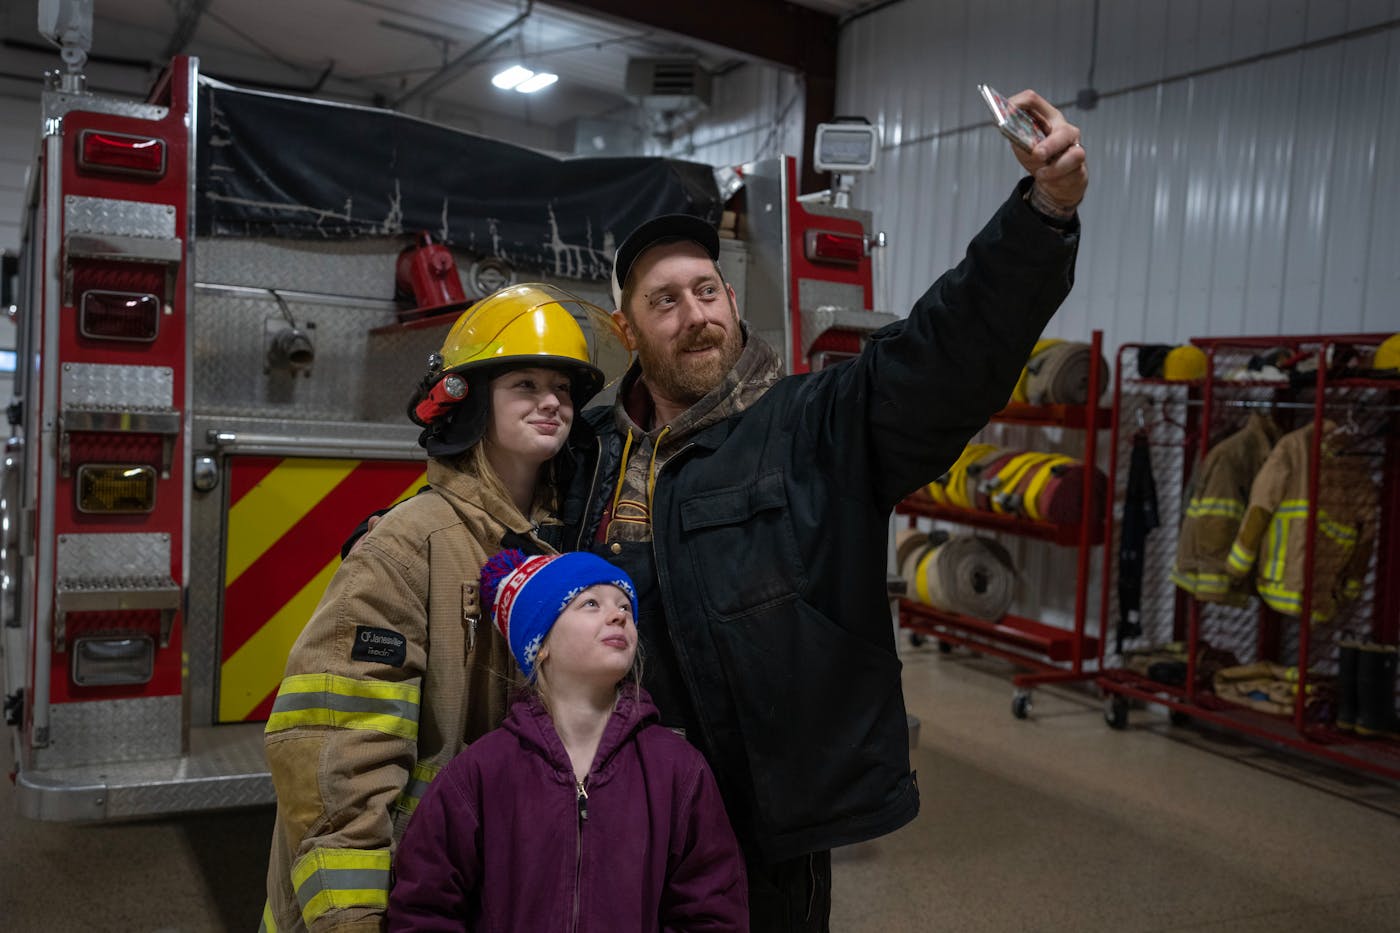 Matt Doughty now trains therapy dogs and is a volunteer firefighter in Remer, Minn. He took his daughters Leah and Madalyn to visit his work. The family enjoys hunting on their land near the Willow River.